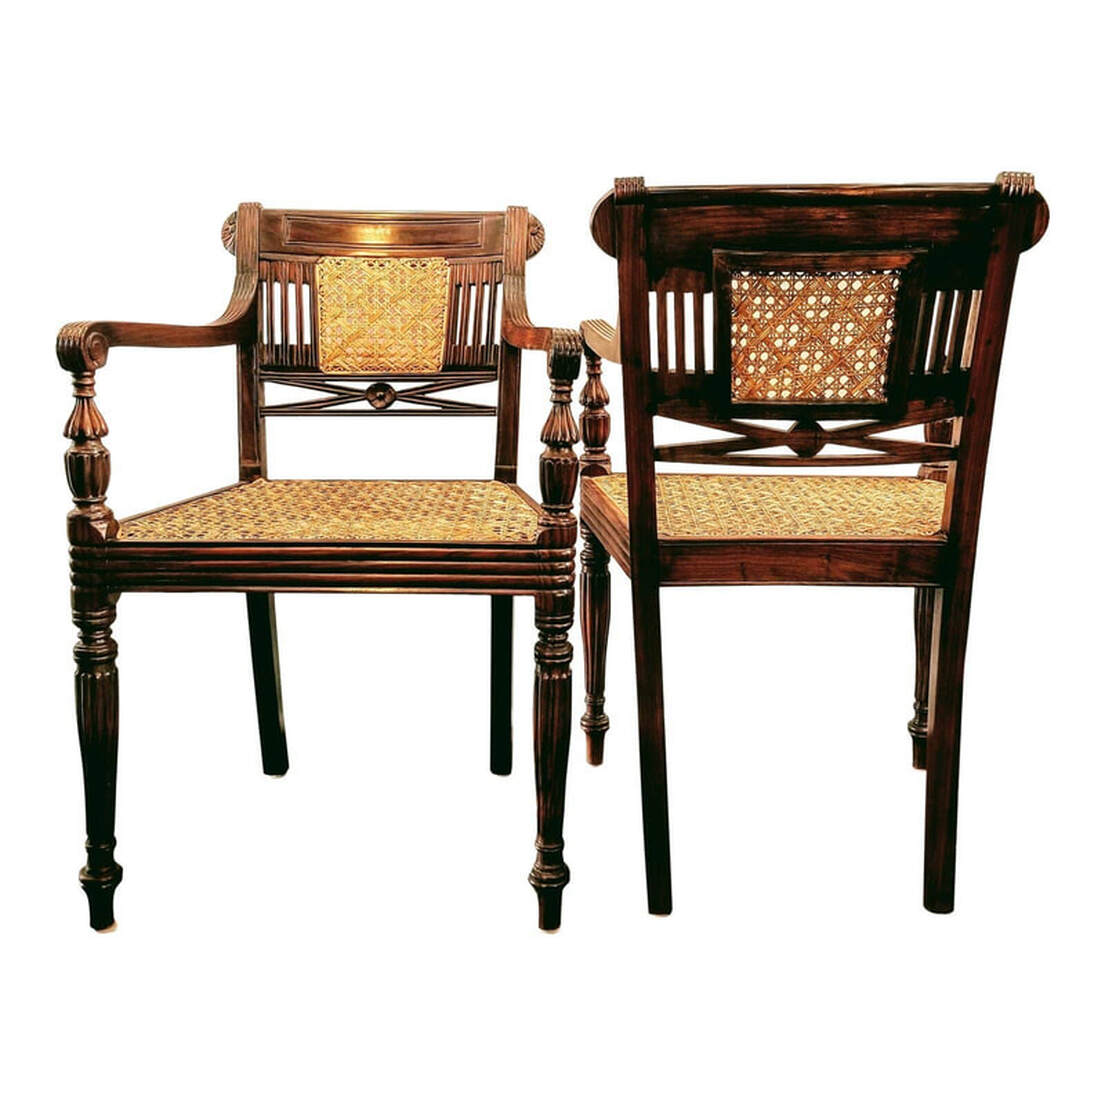 Raffles type dining armchairs or side chairs were hand crafted by The Raj Company in Mumbai, India in the 1990s.  These are called the 